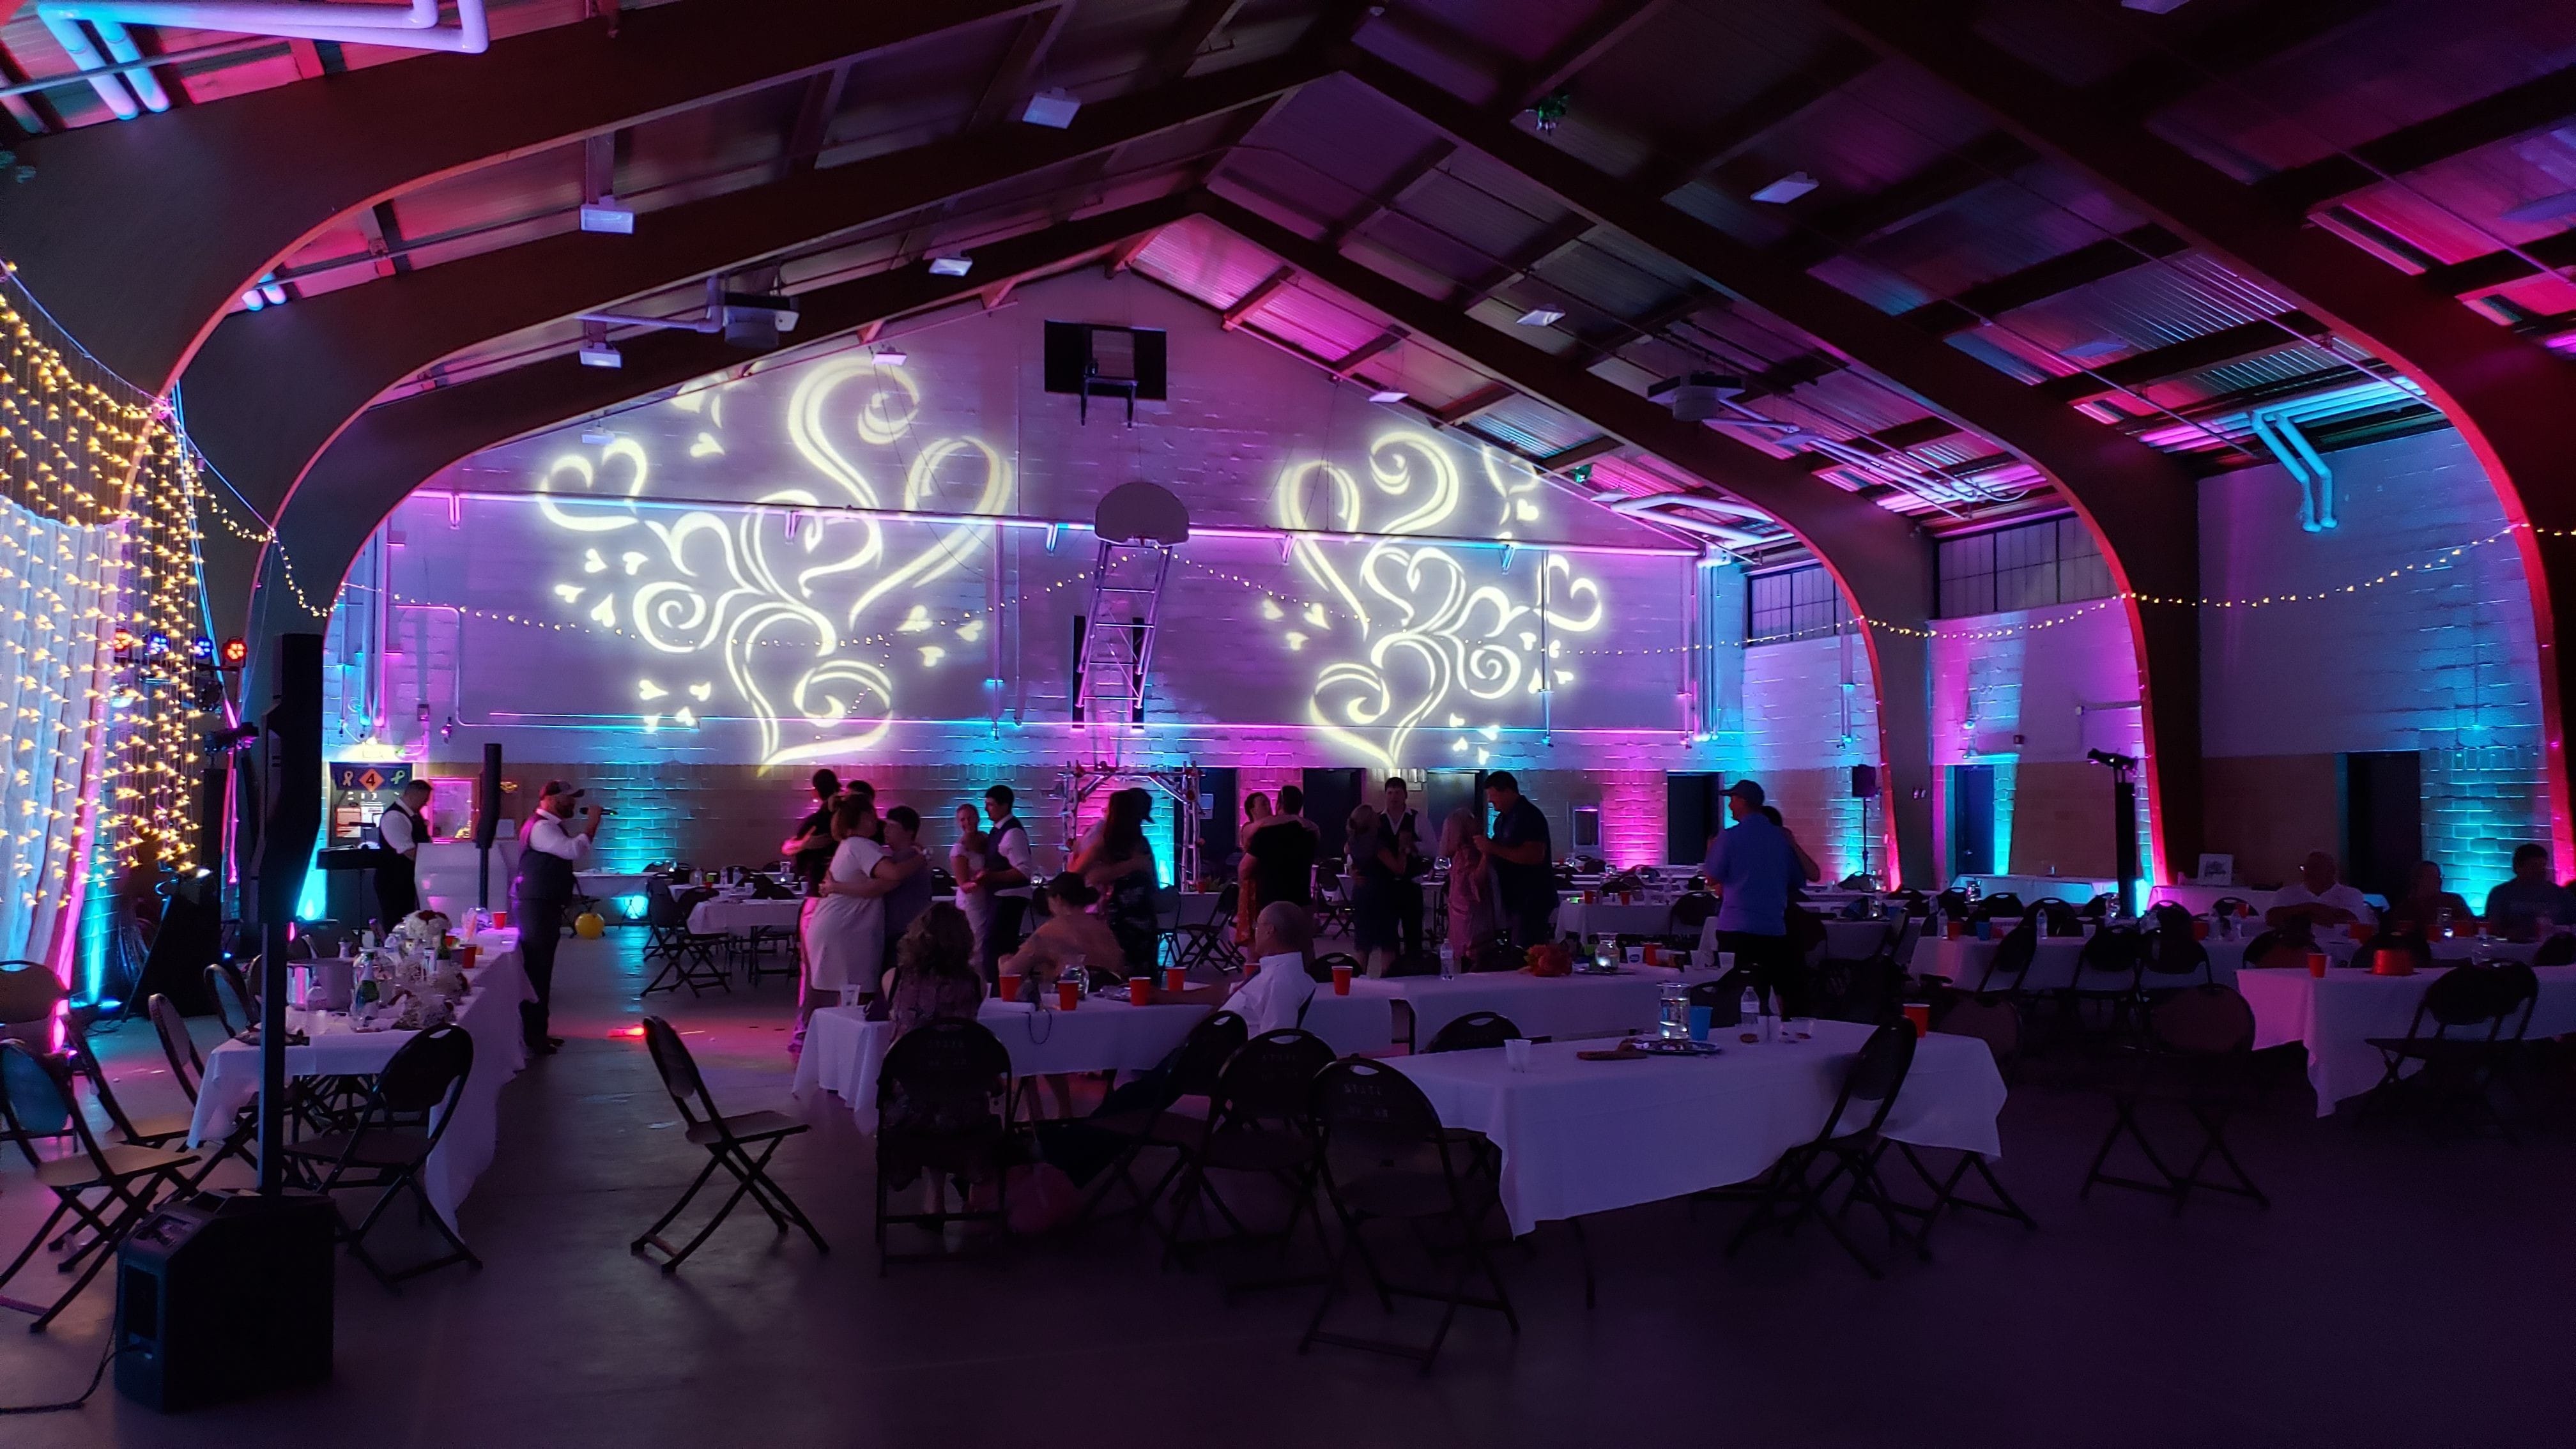 Wedding lighting at the Cloquet Armory. Up lighting in blue and magenta with heart gobos on the wall